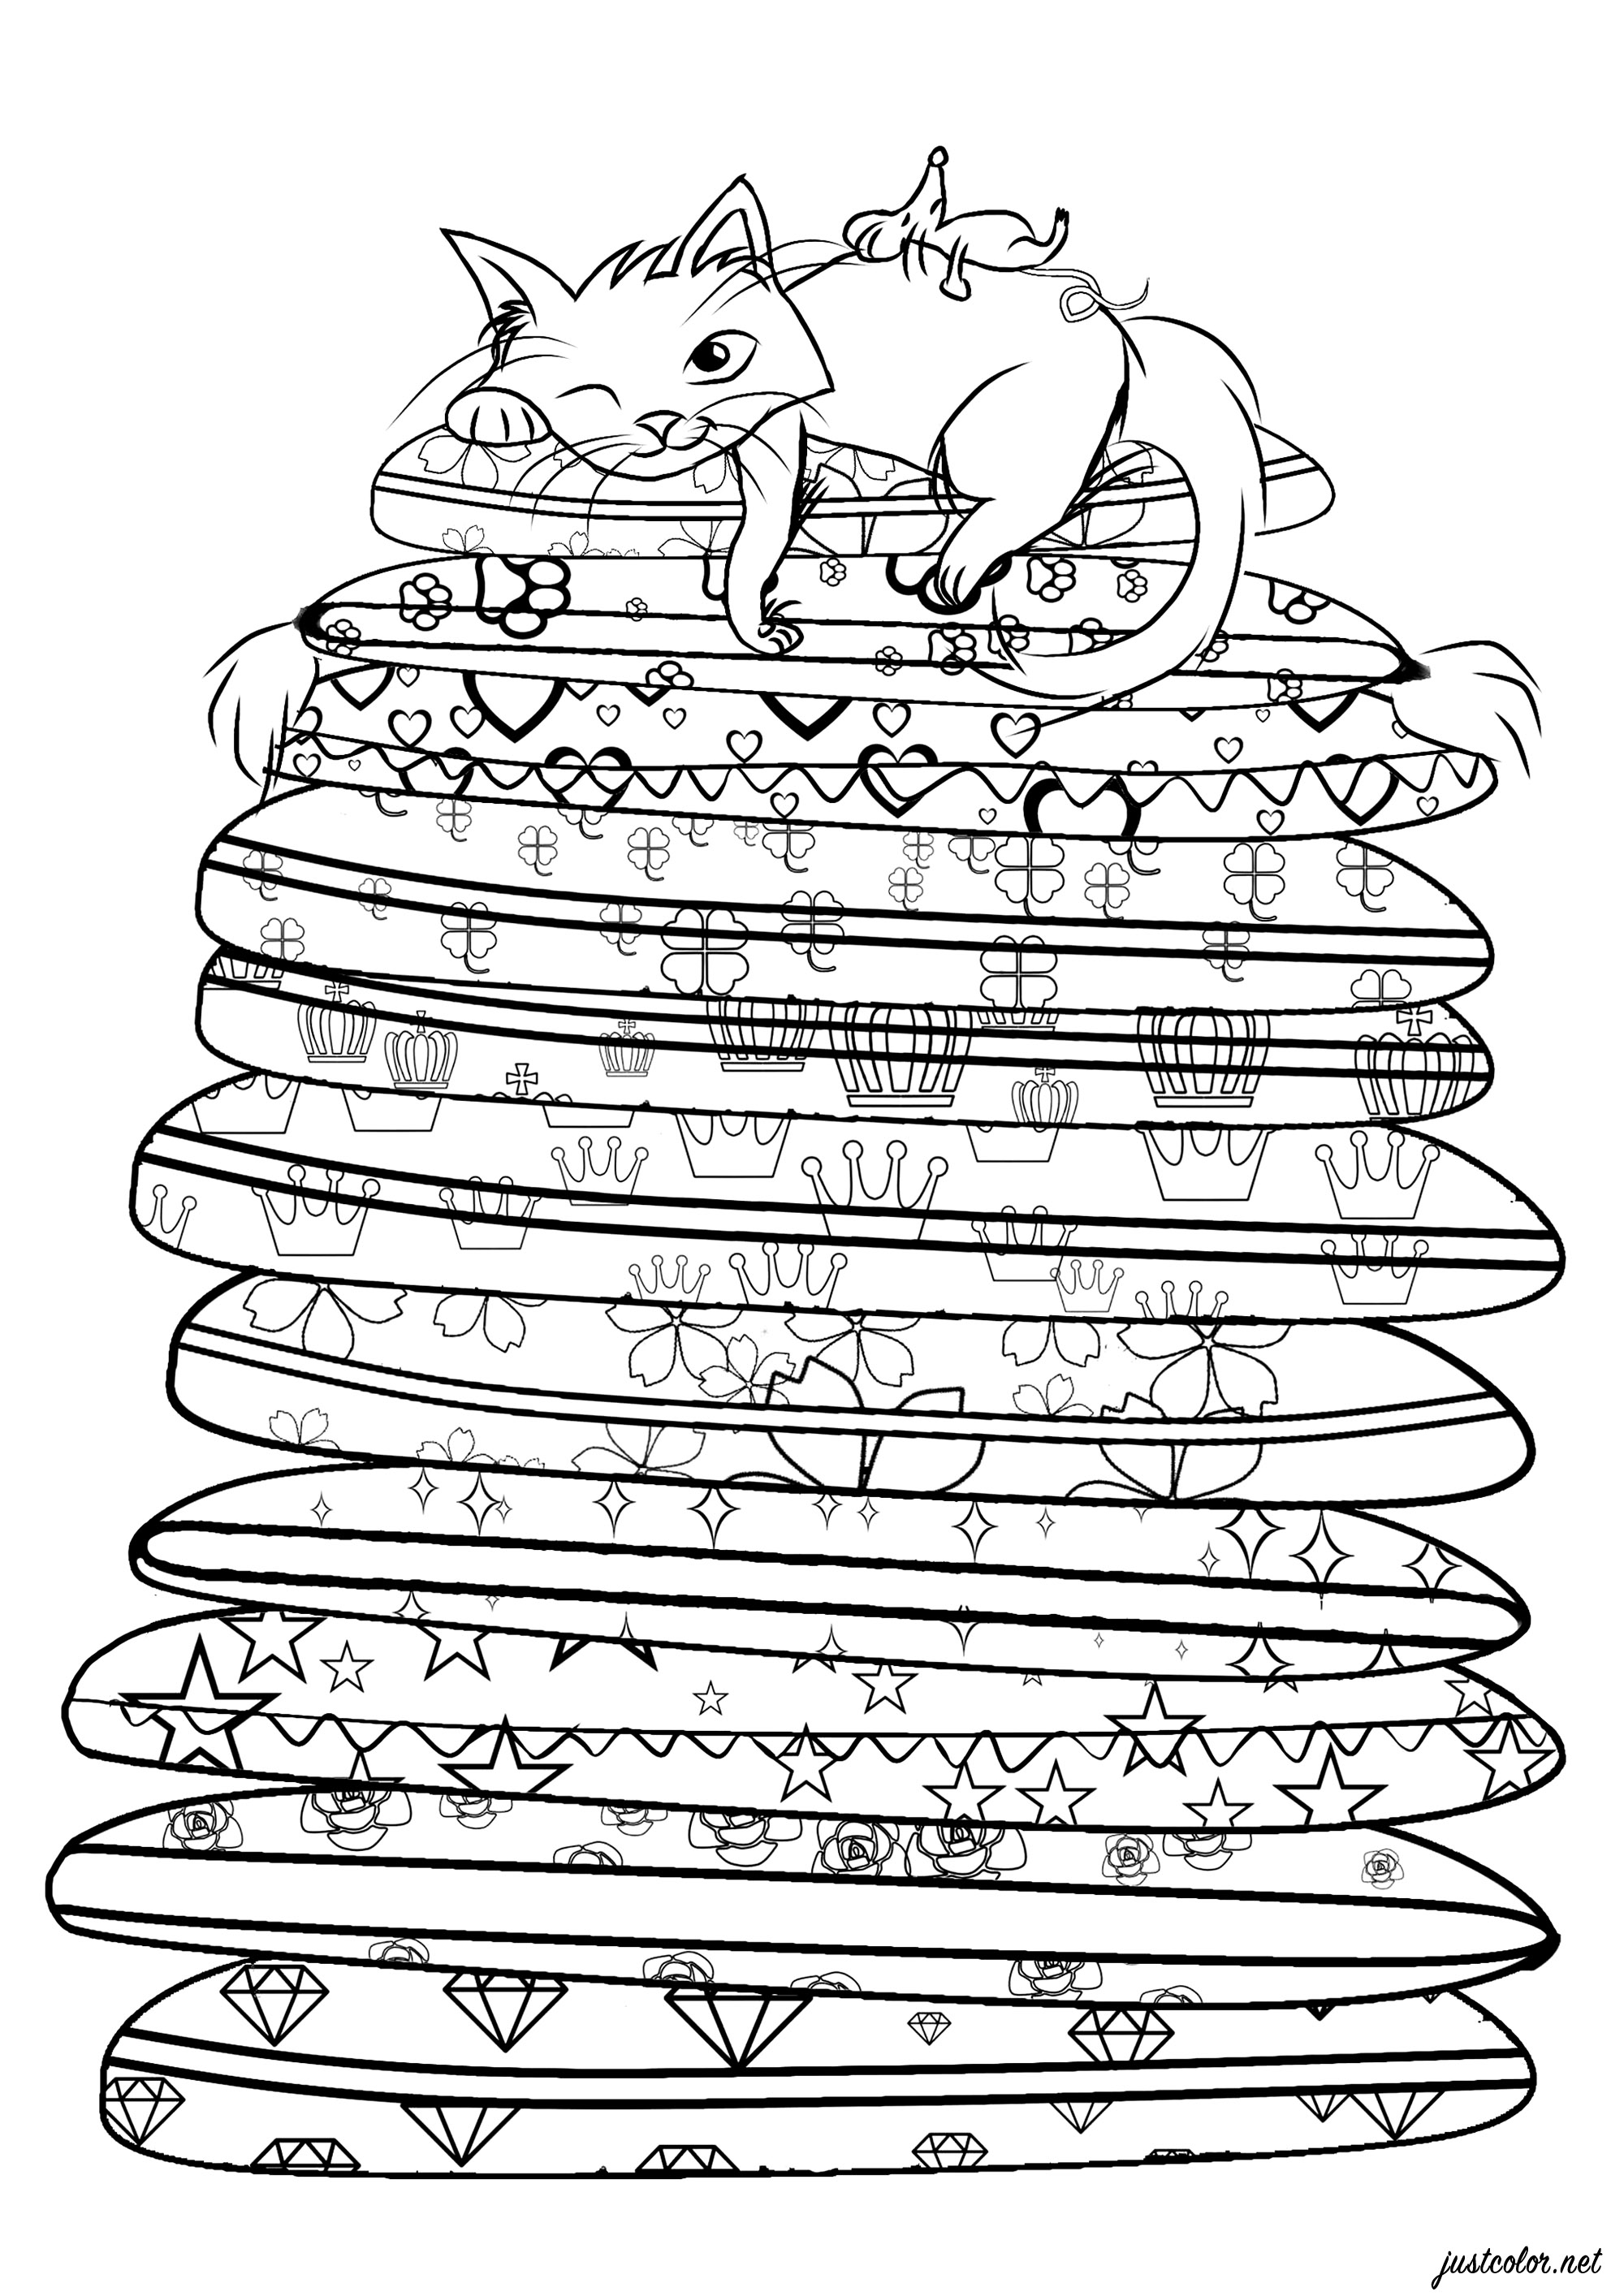 Cat resting on a stack of cushions with various patterns to color